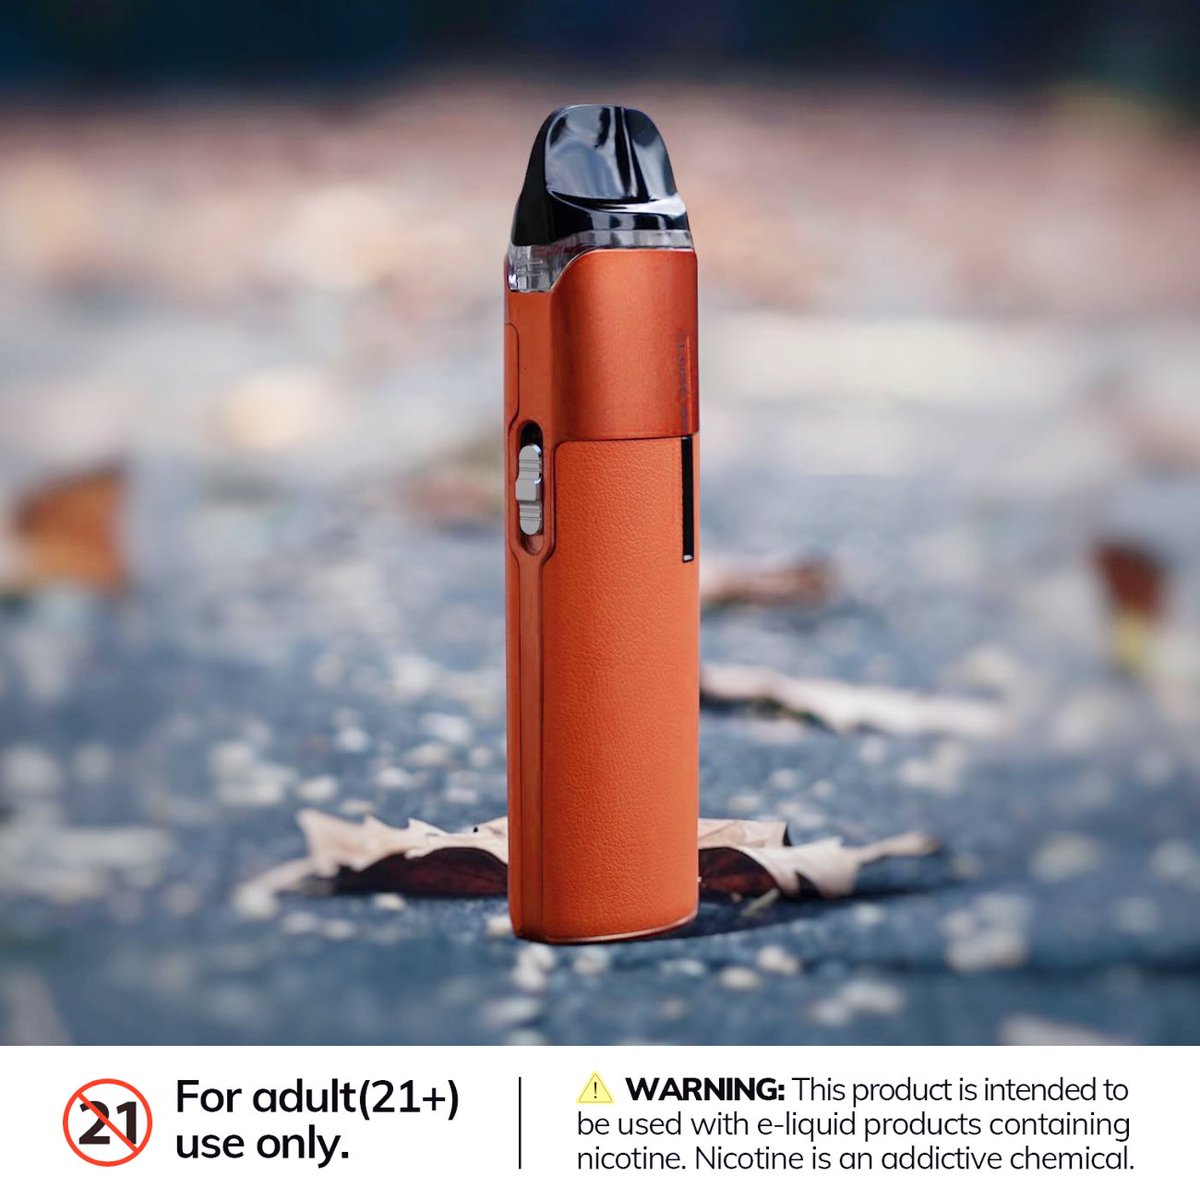 LUXE Q2 has a Deluxe Leather exterior.💯
🛒 vapesourcing.com/vaporesso-luxe…
You can experience unparalleled comfort with this upgraded leather material!🧡
-
#vapesourcing #vape #vapelife #gift #FreeShipping #newarrivals #newvape #vapor #vaping #vapefam #vaporesso #vaporessoluxeq2 #luxeq2